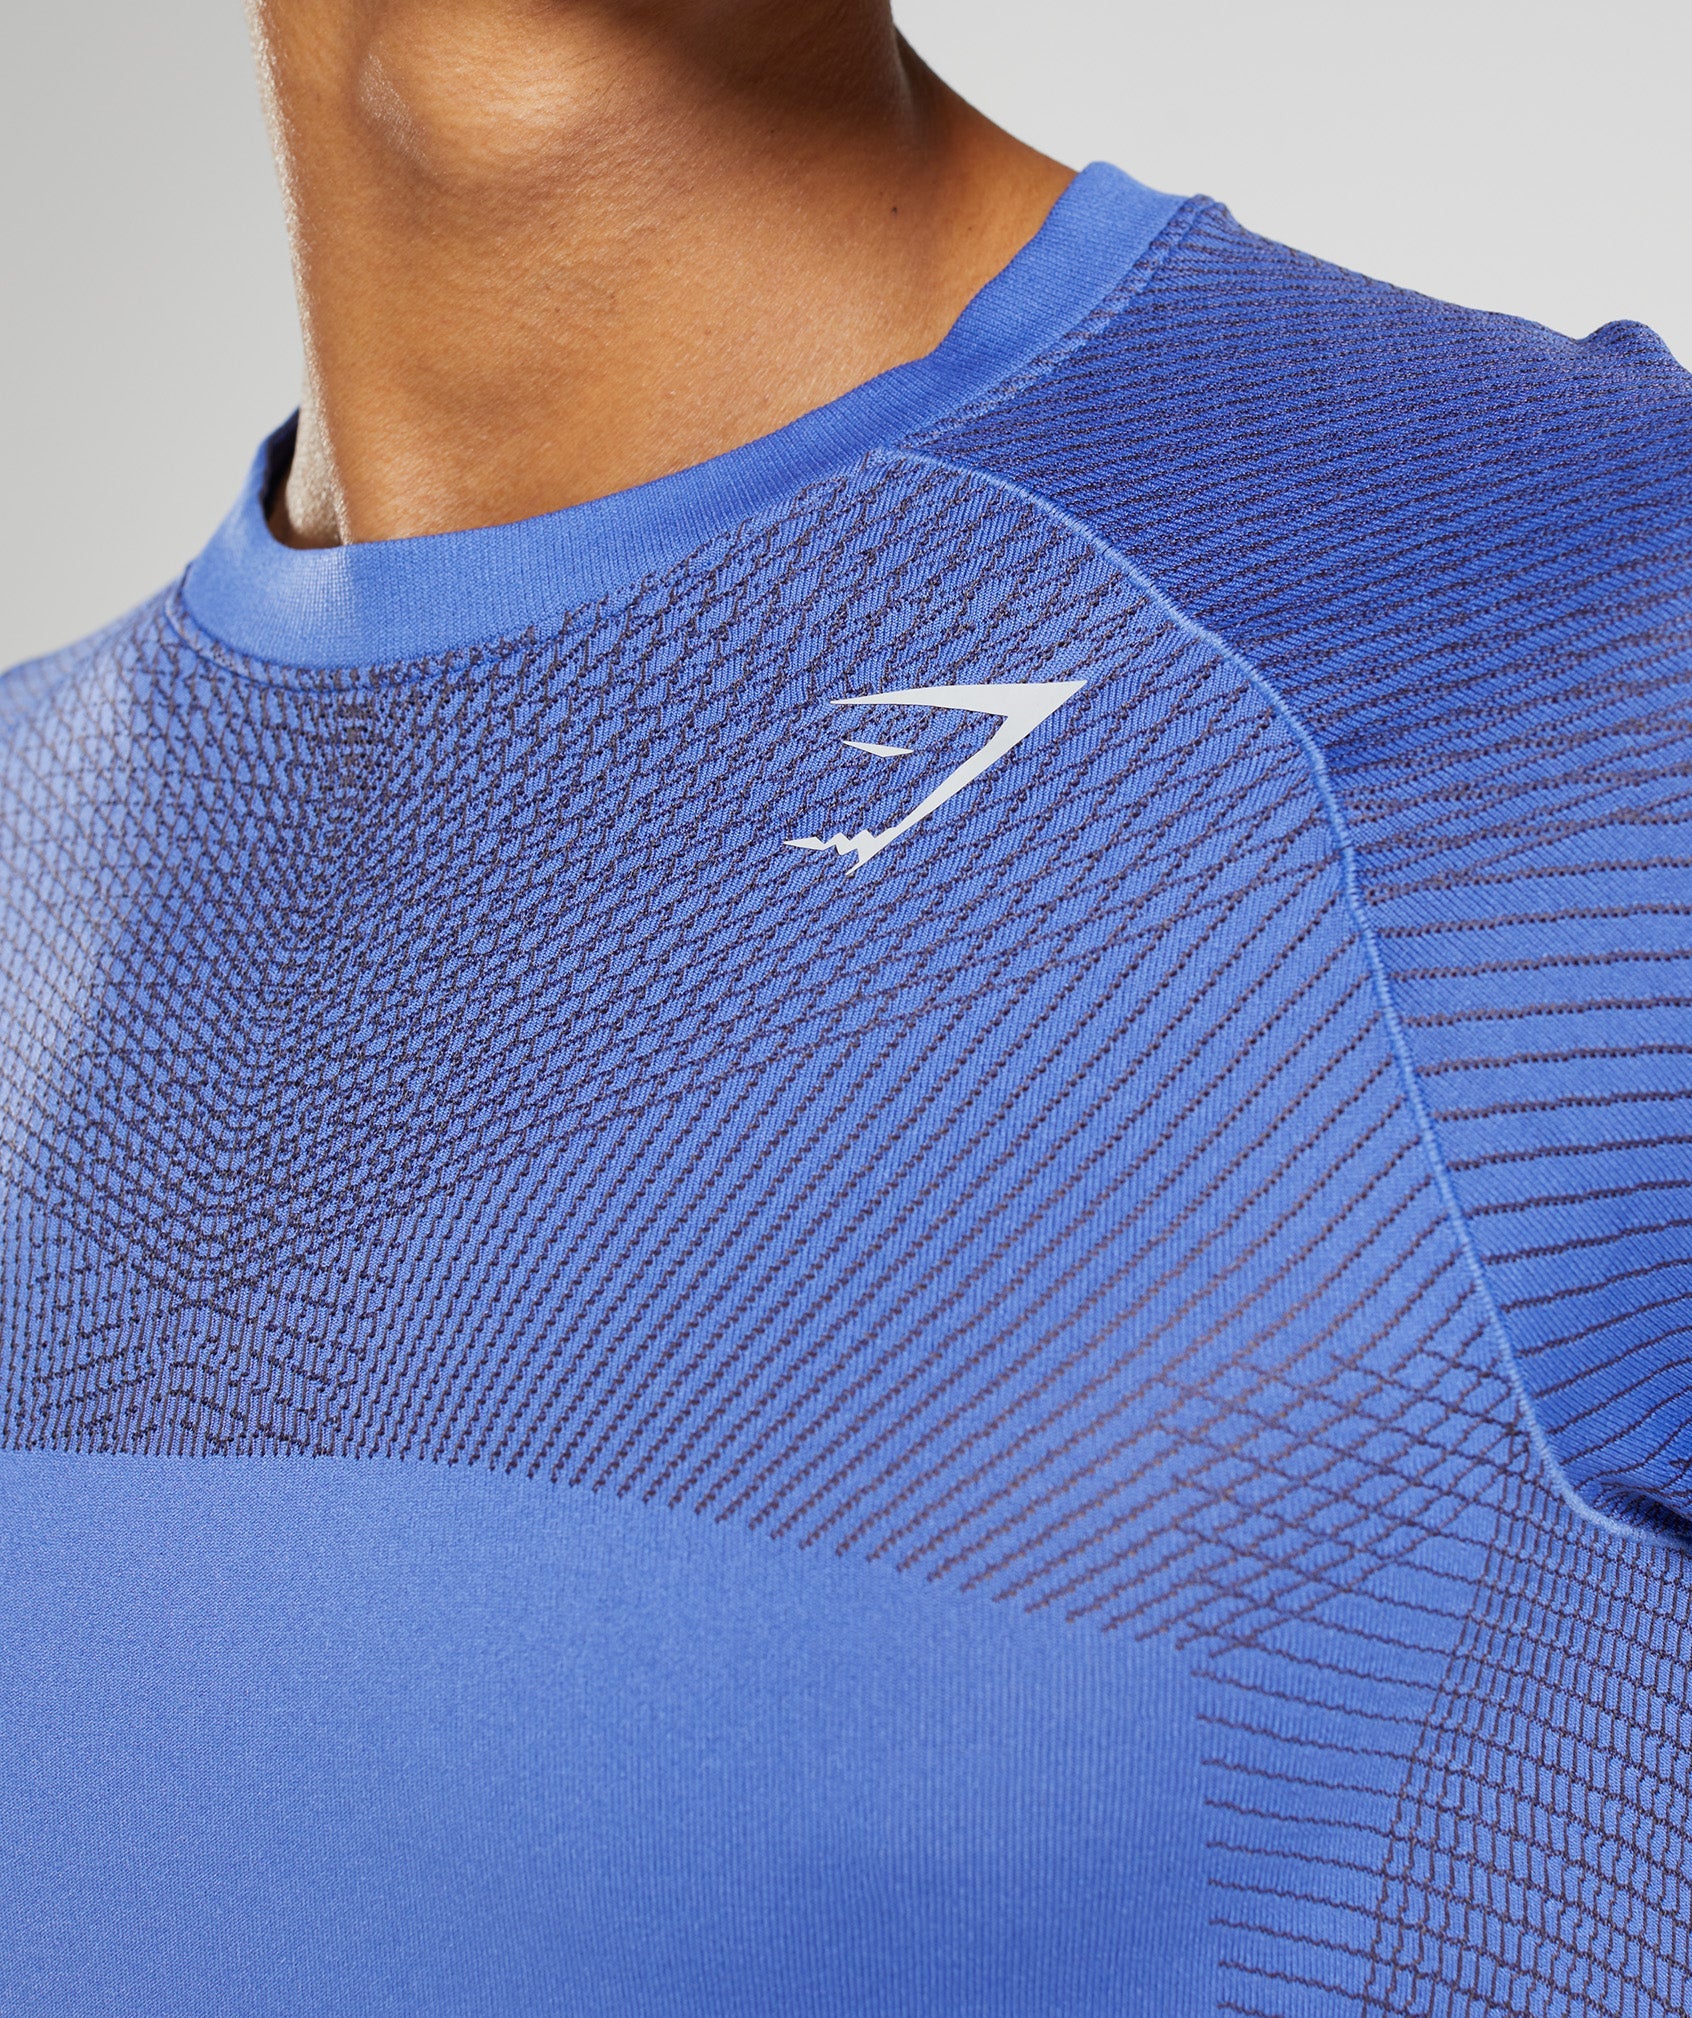 Apex Seamless T-Shirt in Court Blue/Onyx Grey